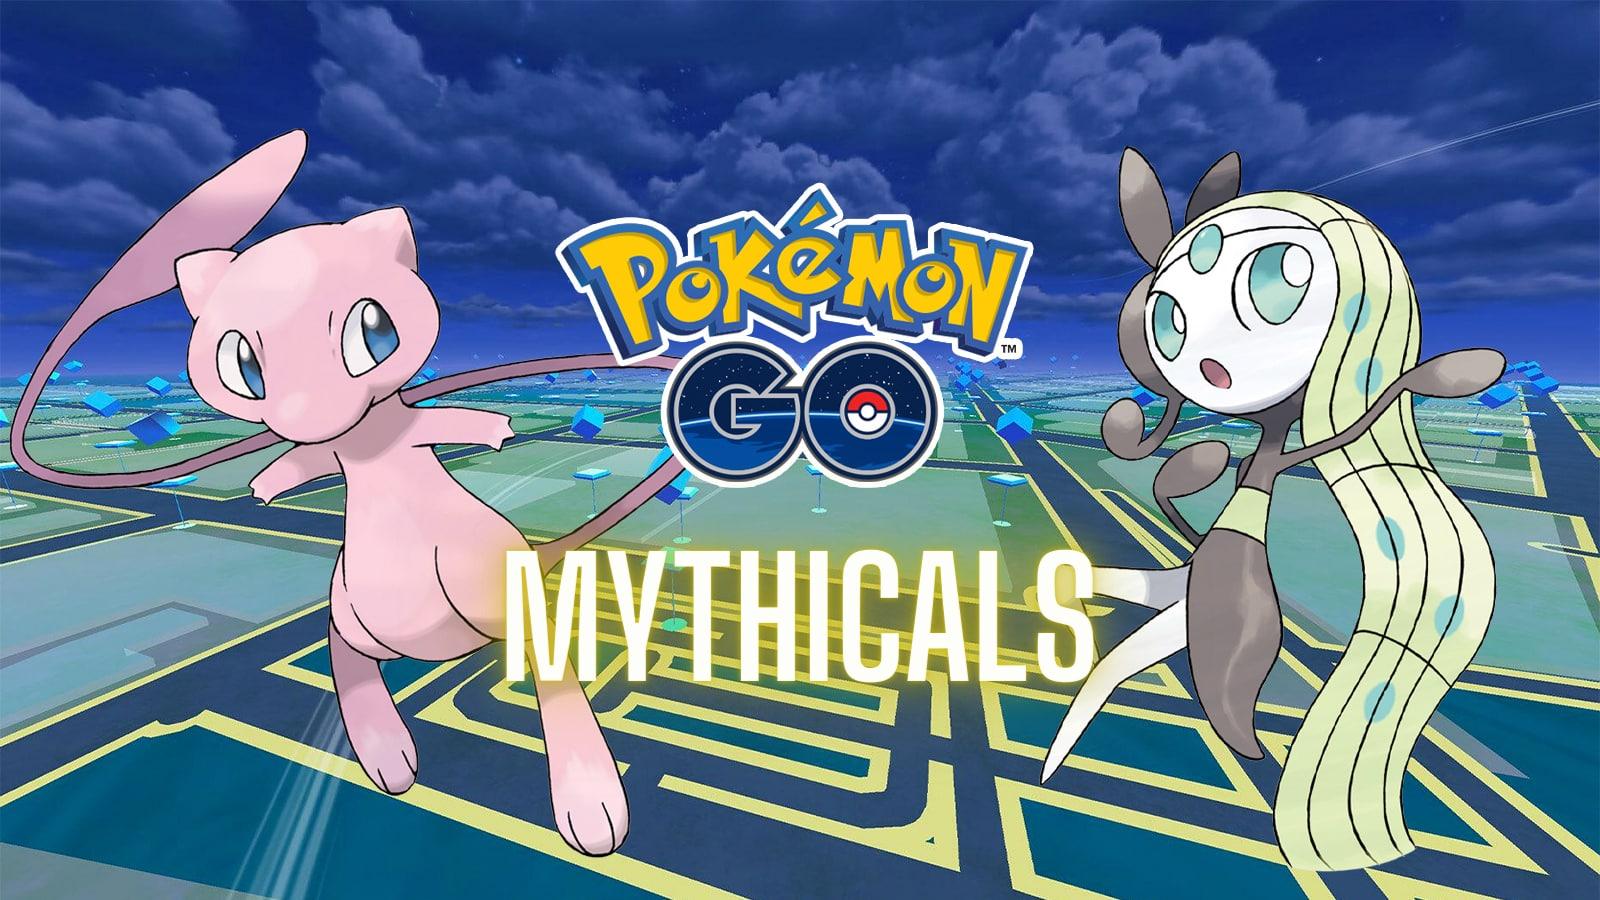 Mythical Pokemon Mew and Meloetta appearing in Pokemon Go